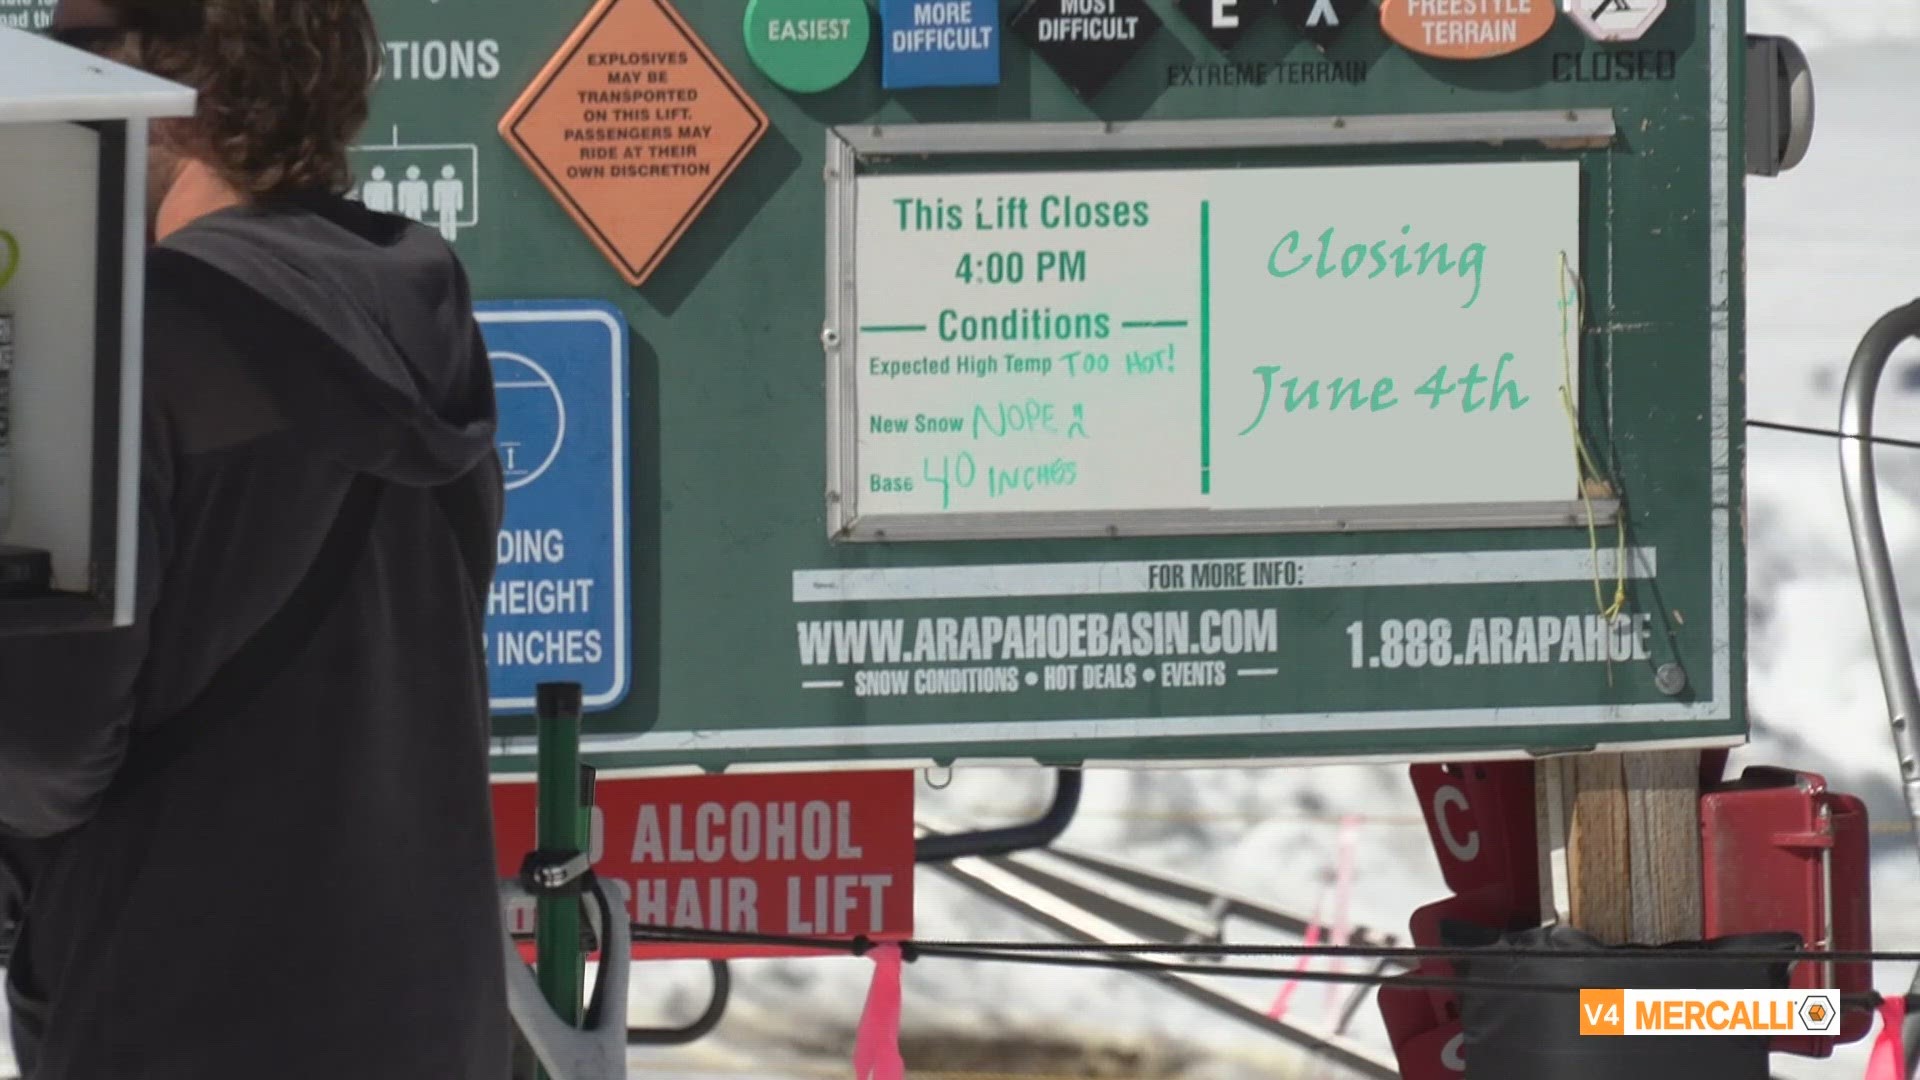 Arapahoe Basin is planning a party on the mountain all weekend to end their 2022-23 season.